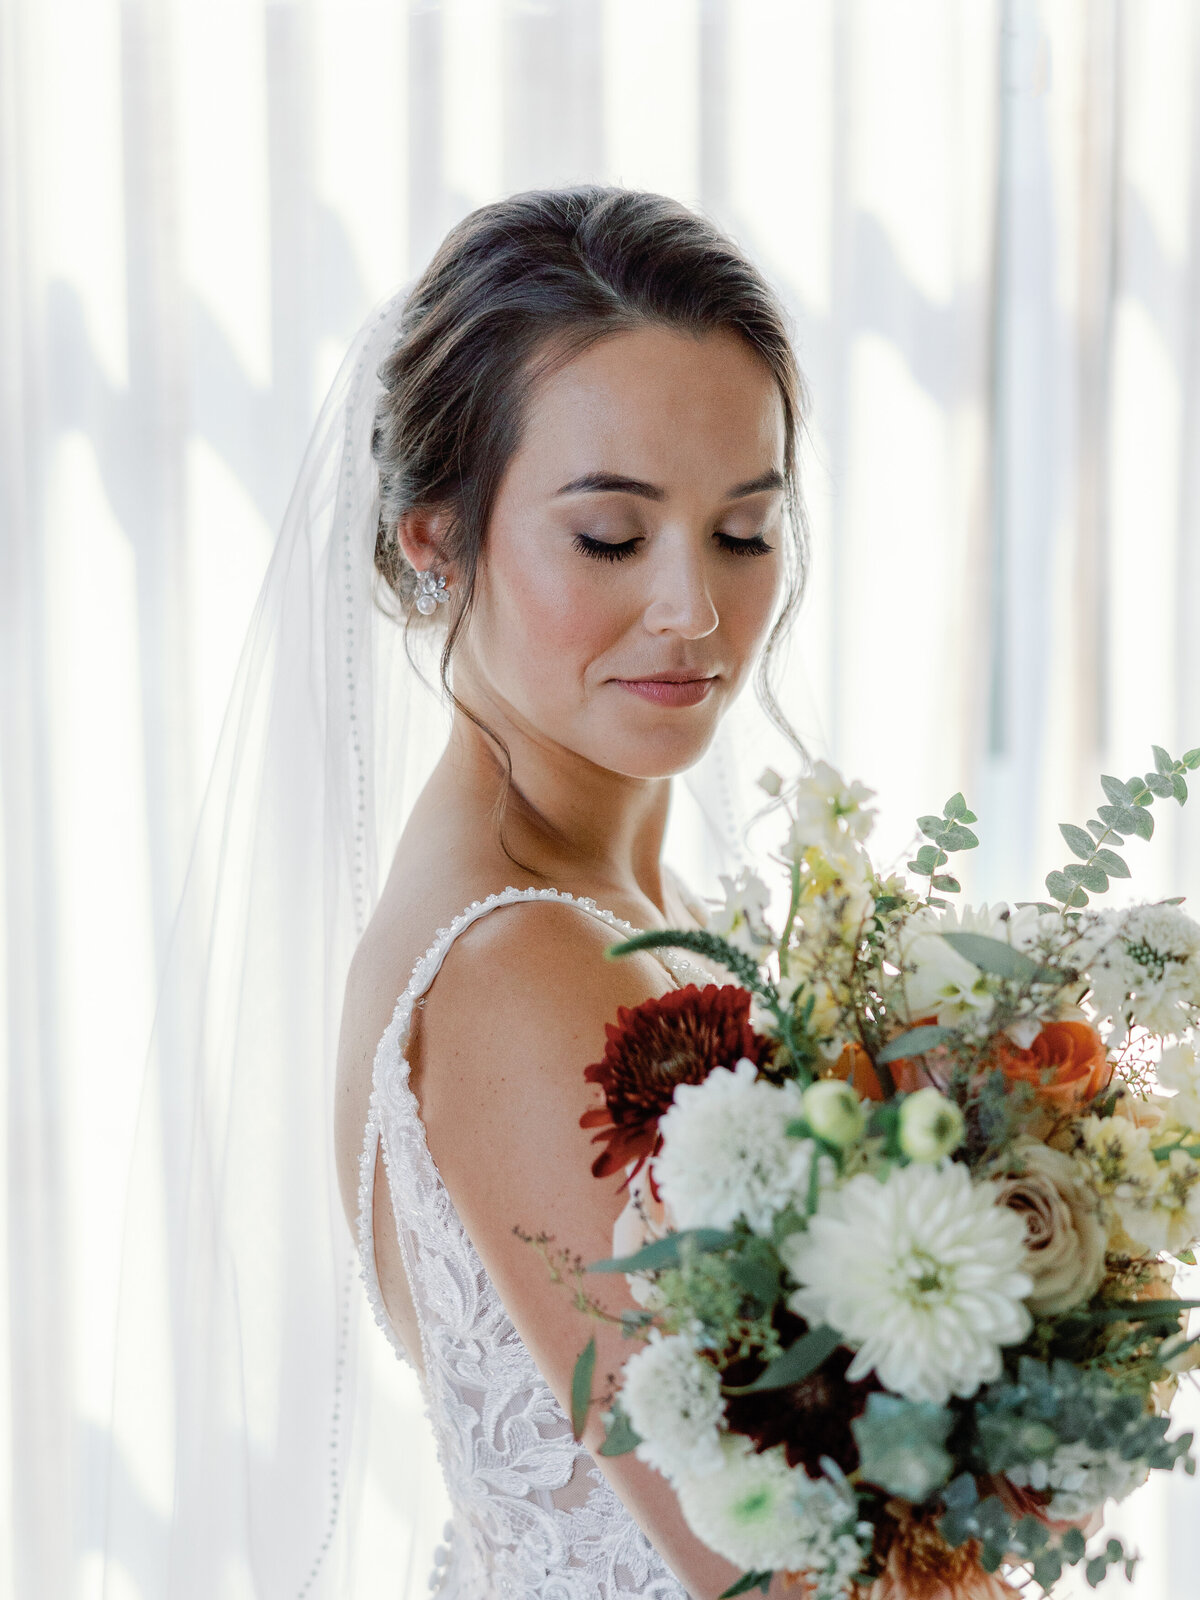 A bridal portrait of a bride holding and looking down at her bouquet full of white, red, and orange flowers.